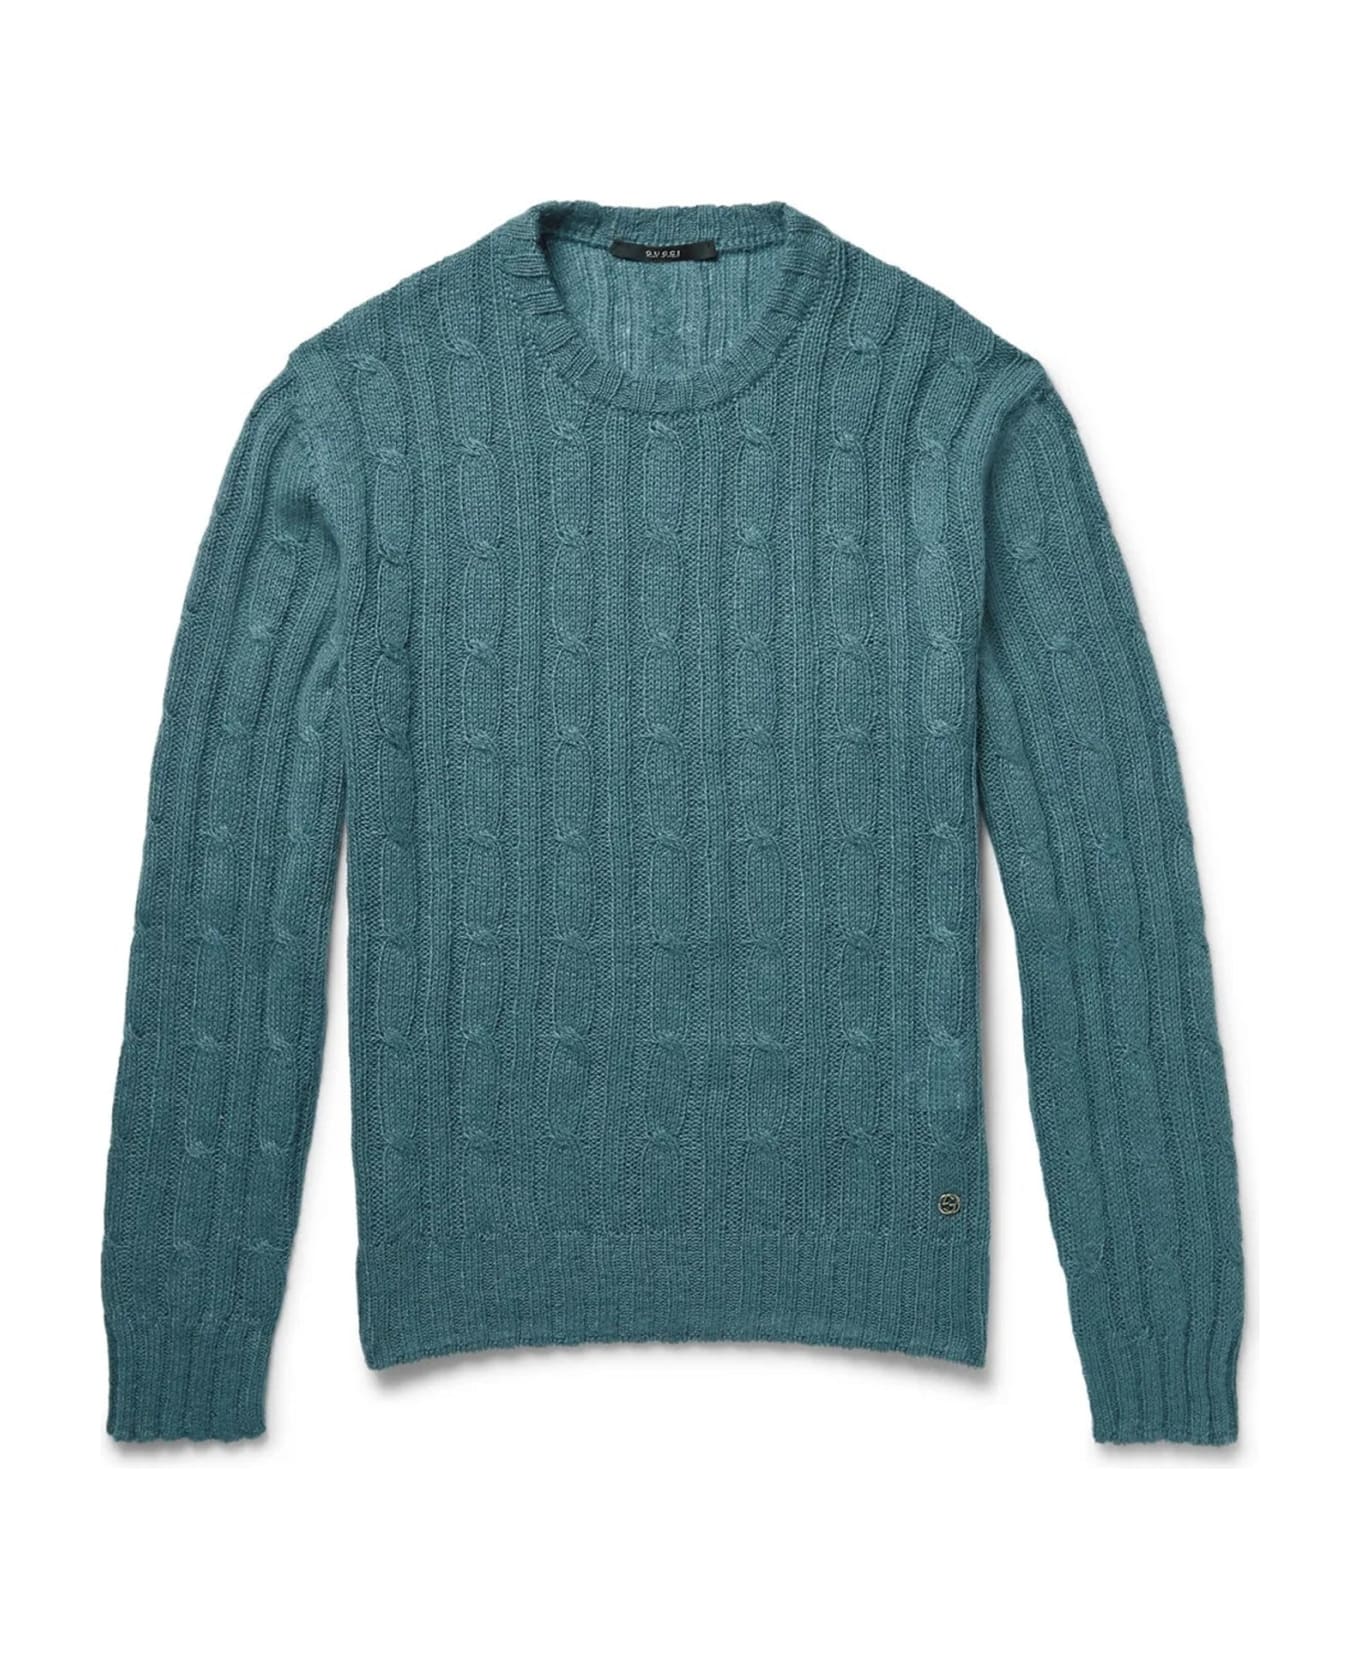 Gucci Cable Knit Sweater - Green